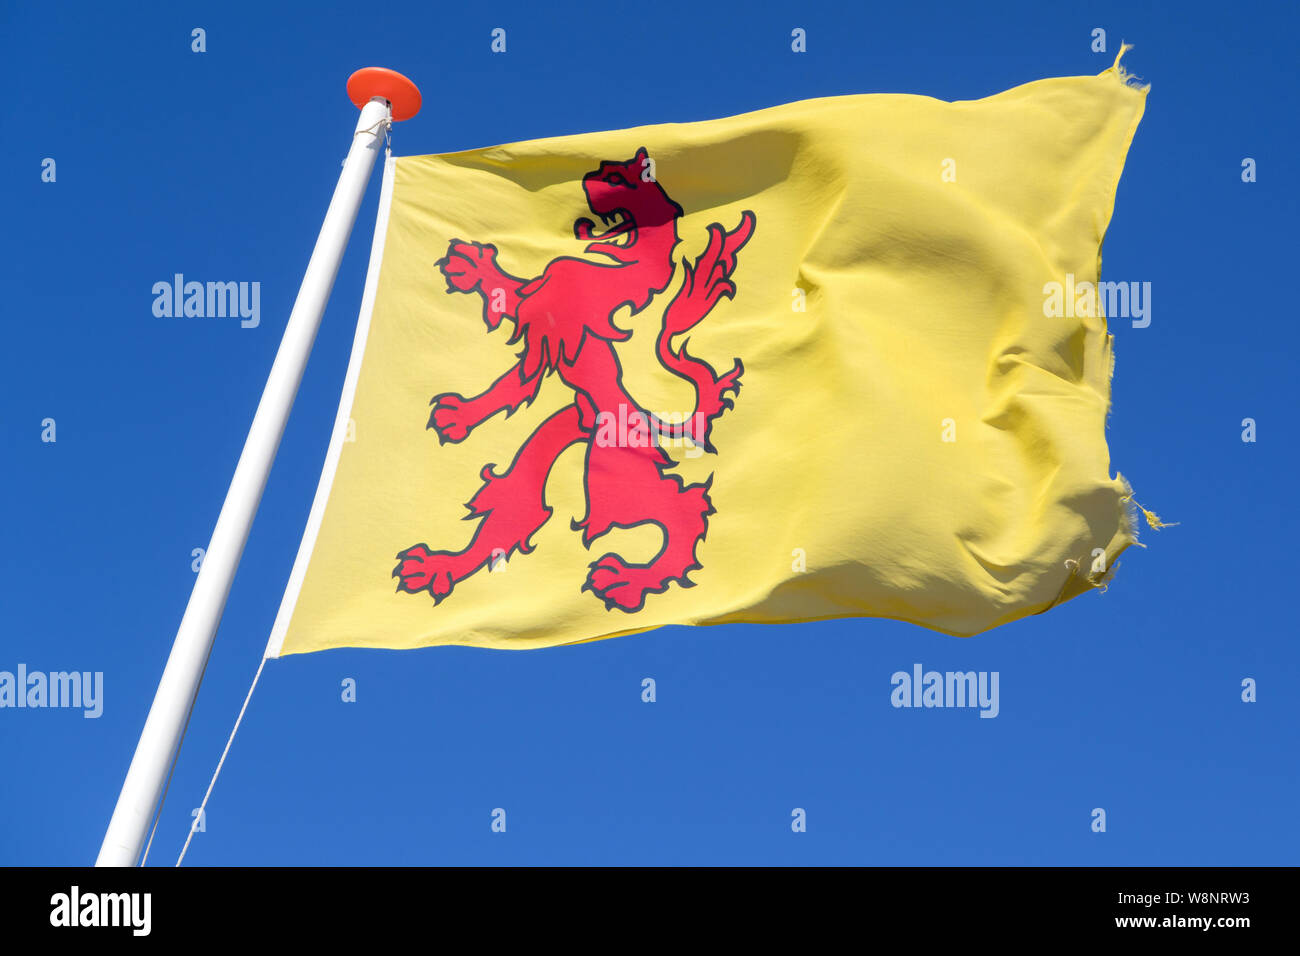 flag of Dutch province South Holland flying in the wind Stock Photo